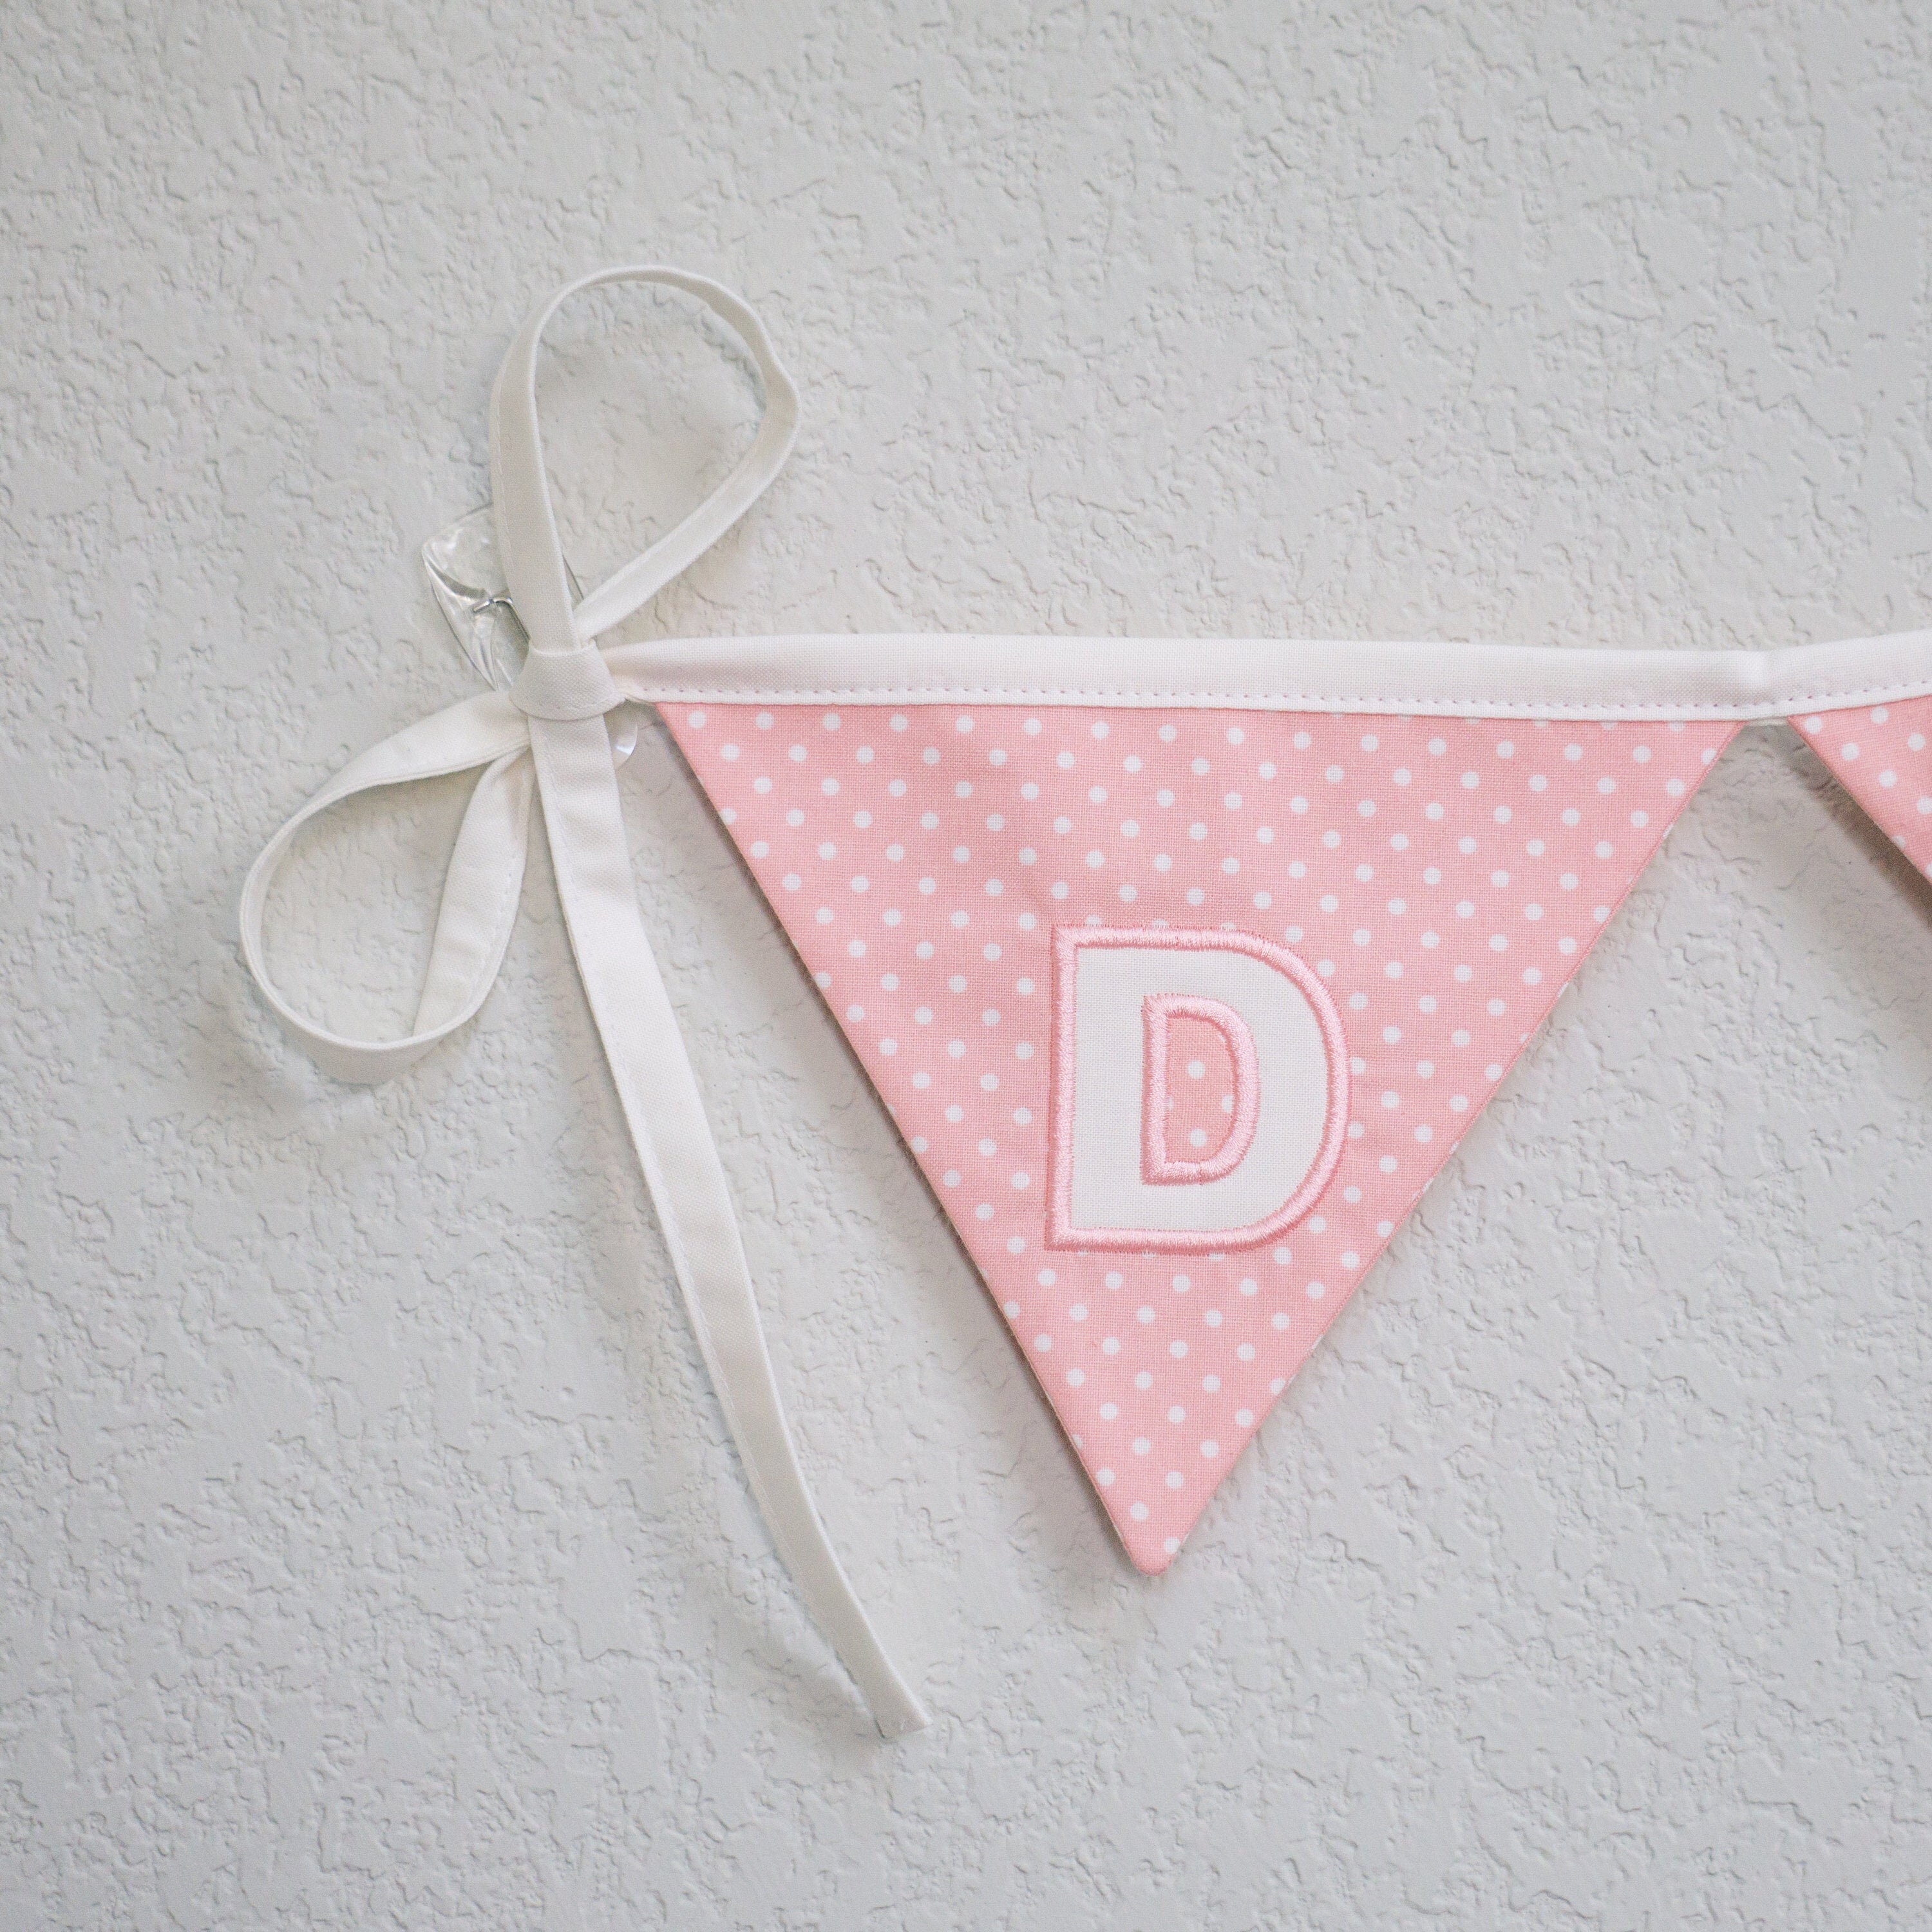 Pink Party Bunting Baby Shower Bride Mix of Floral Dots Vintage Prints 20 Flags